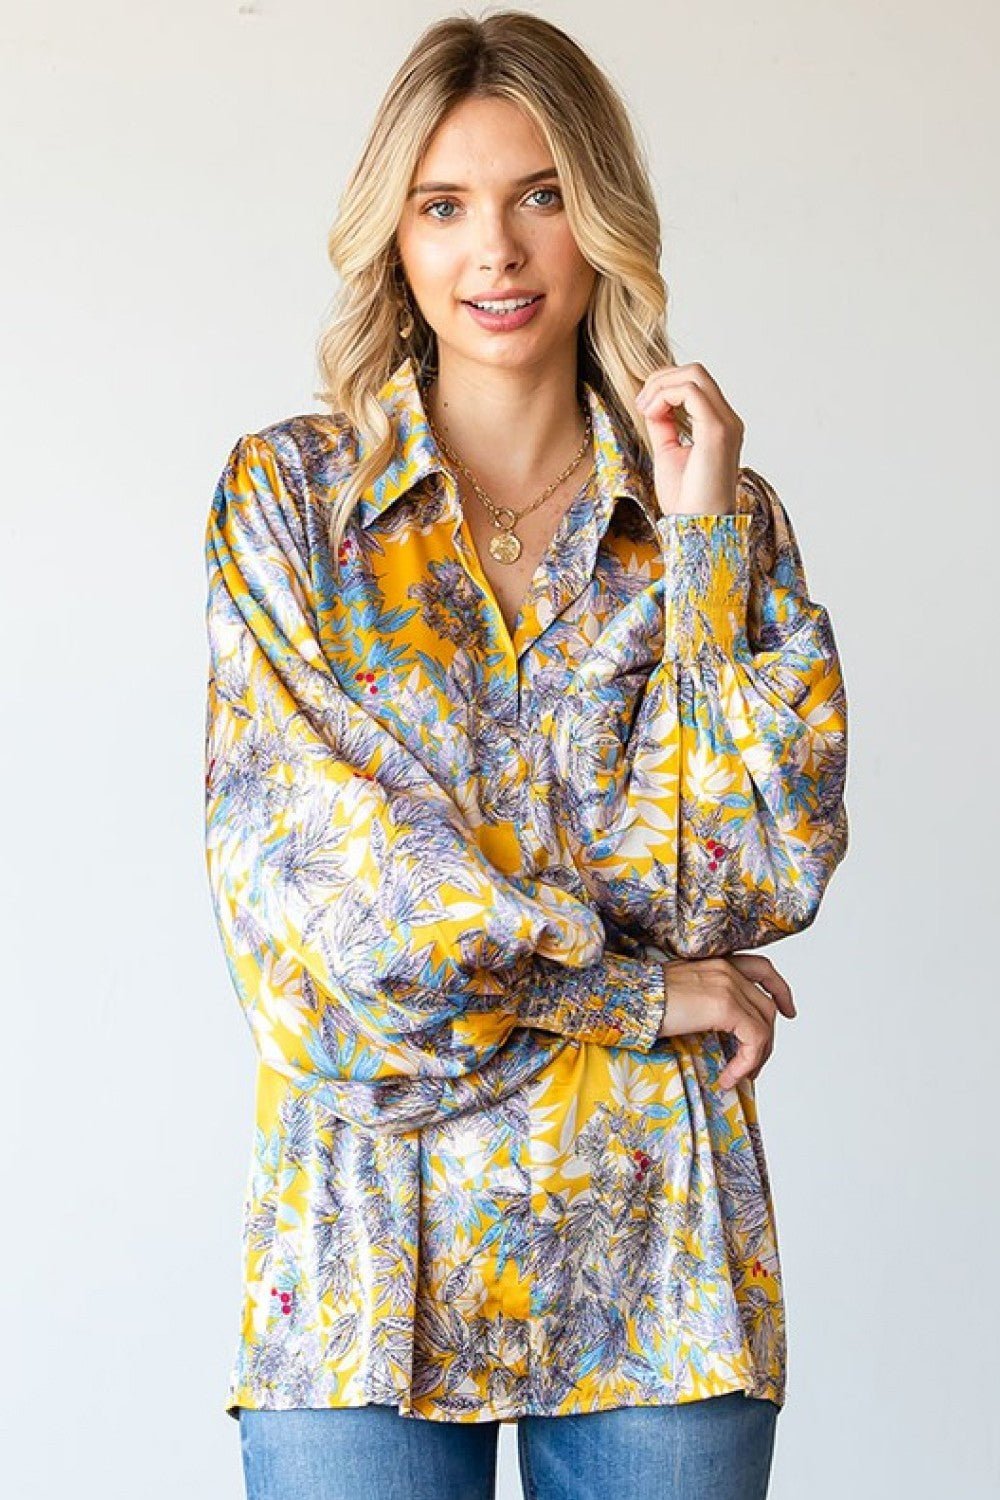 First Love Full Size Floral Lantern Sleeve Blouse - Fashion Girl Online Store